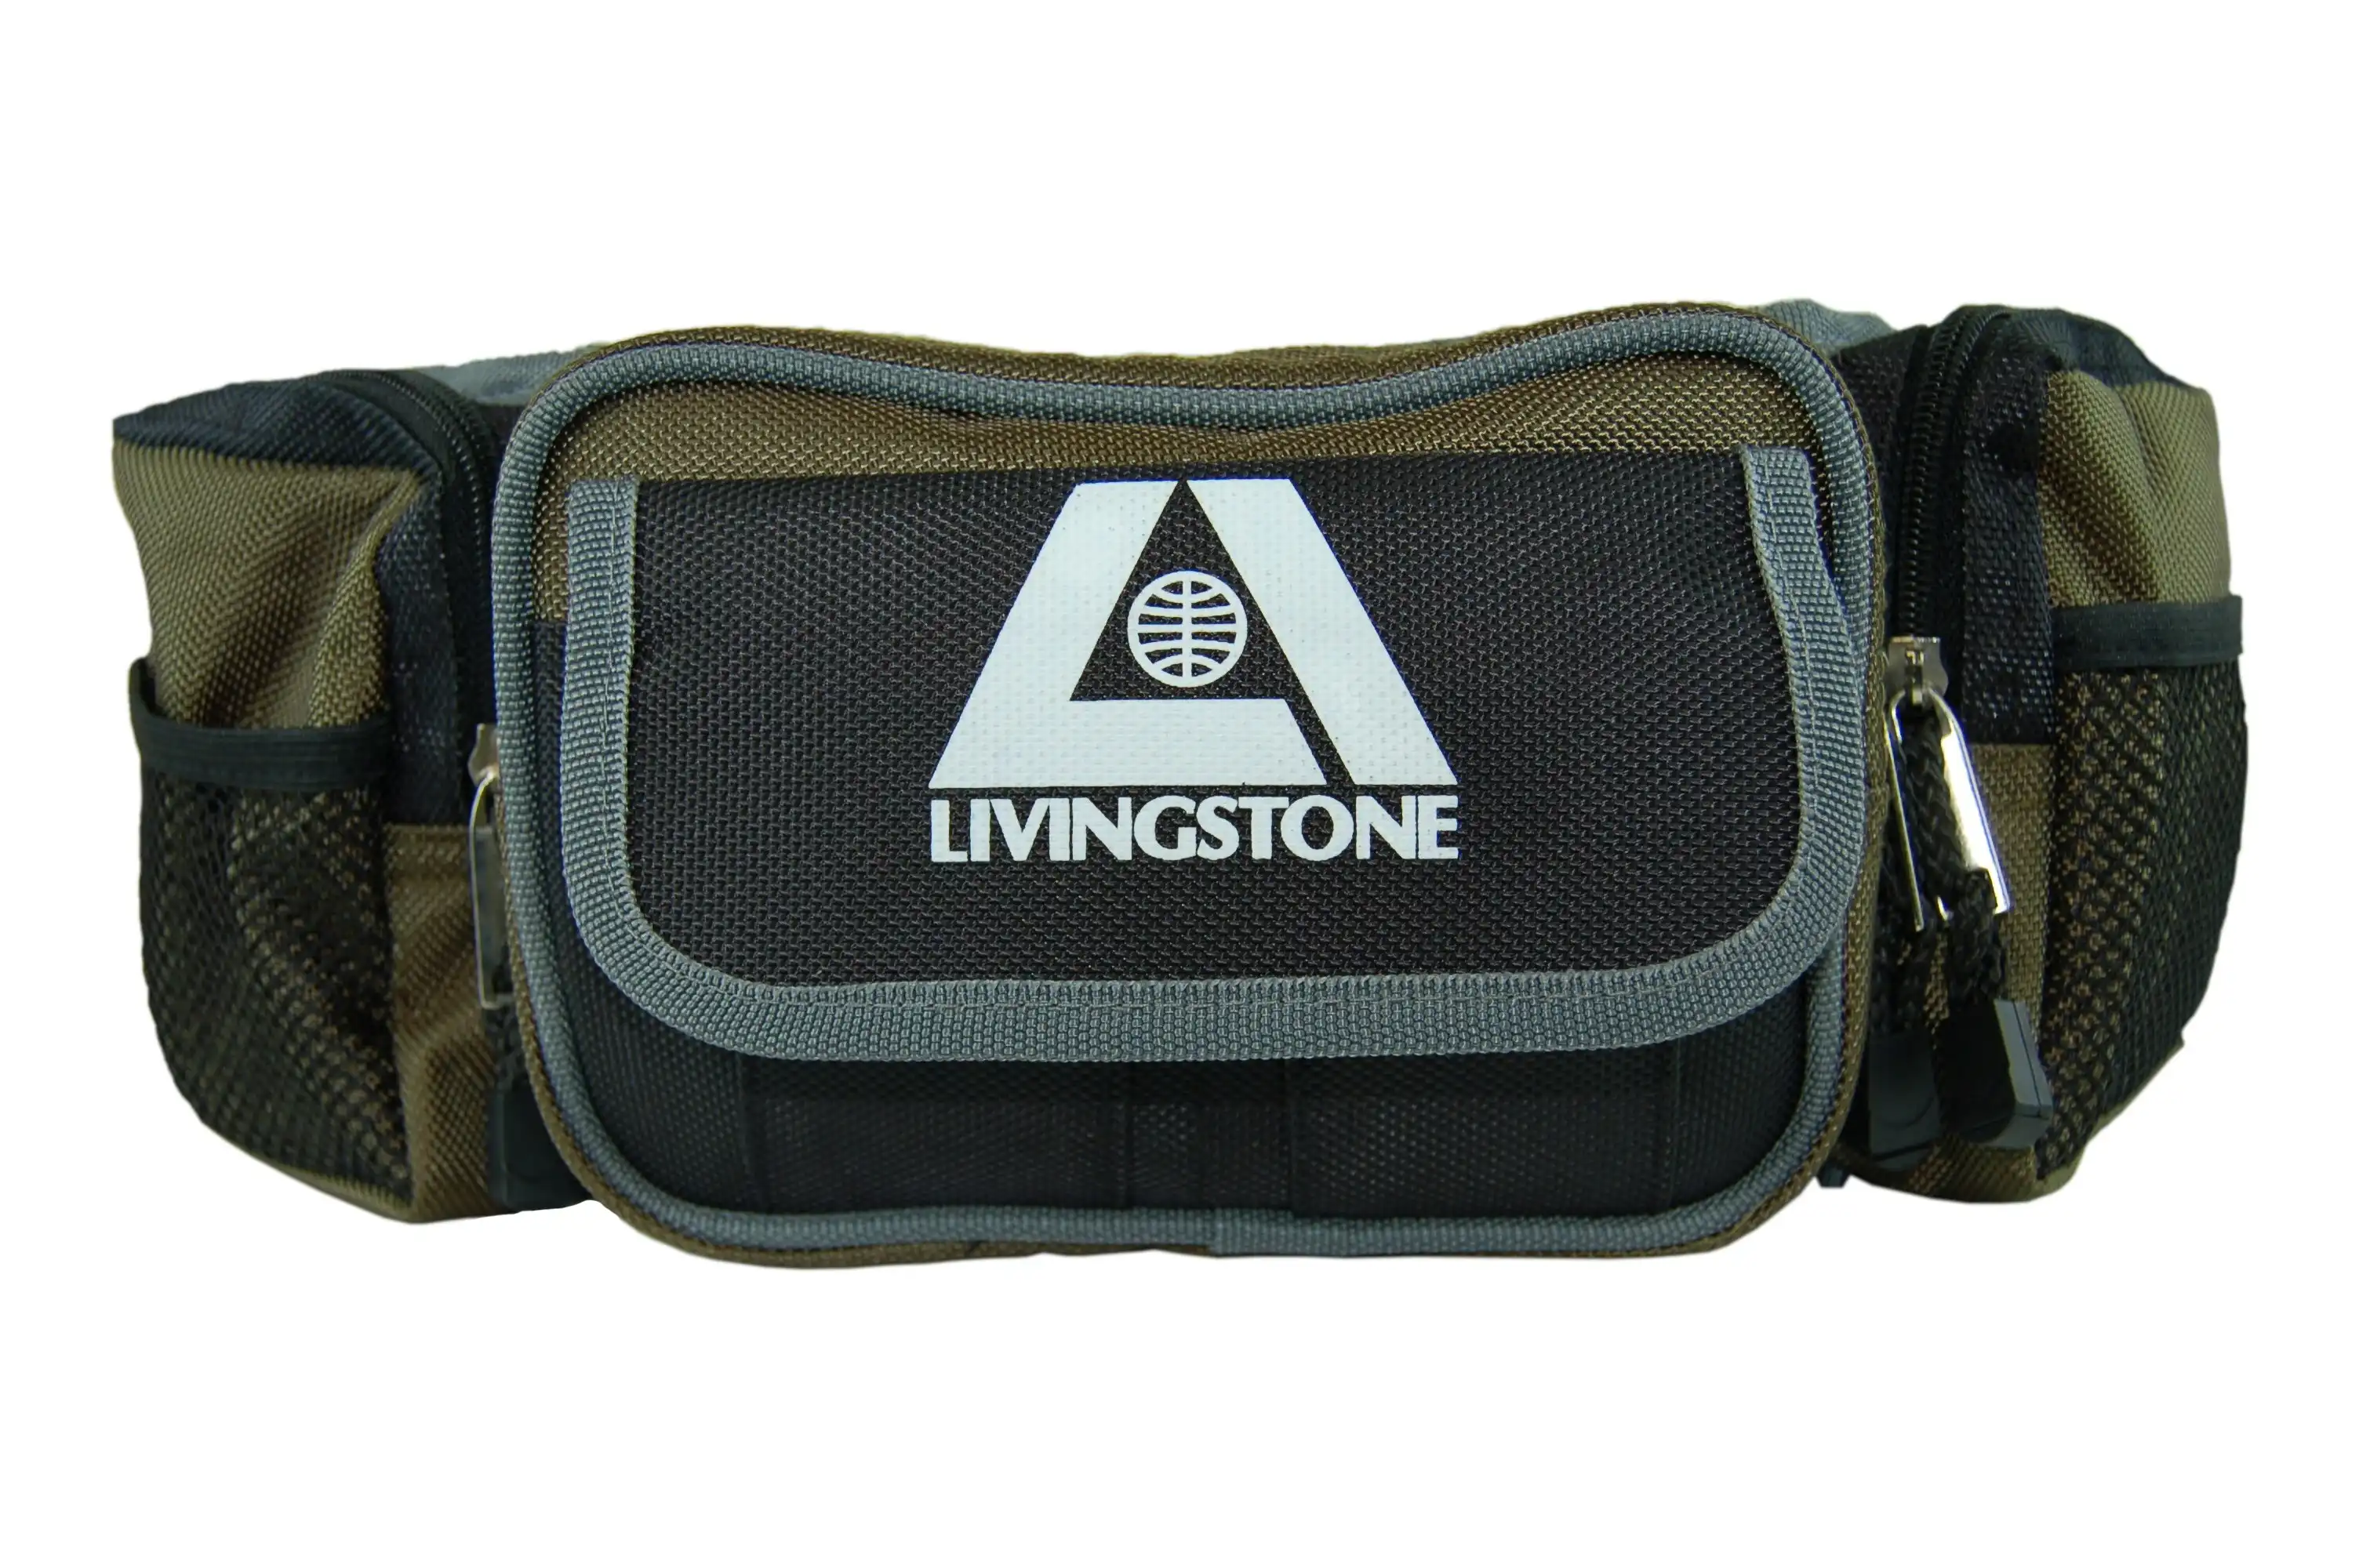 Livingstone Personal Sports First Aid Kit, Complete Set In Bum Bag x3